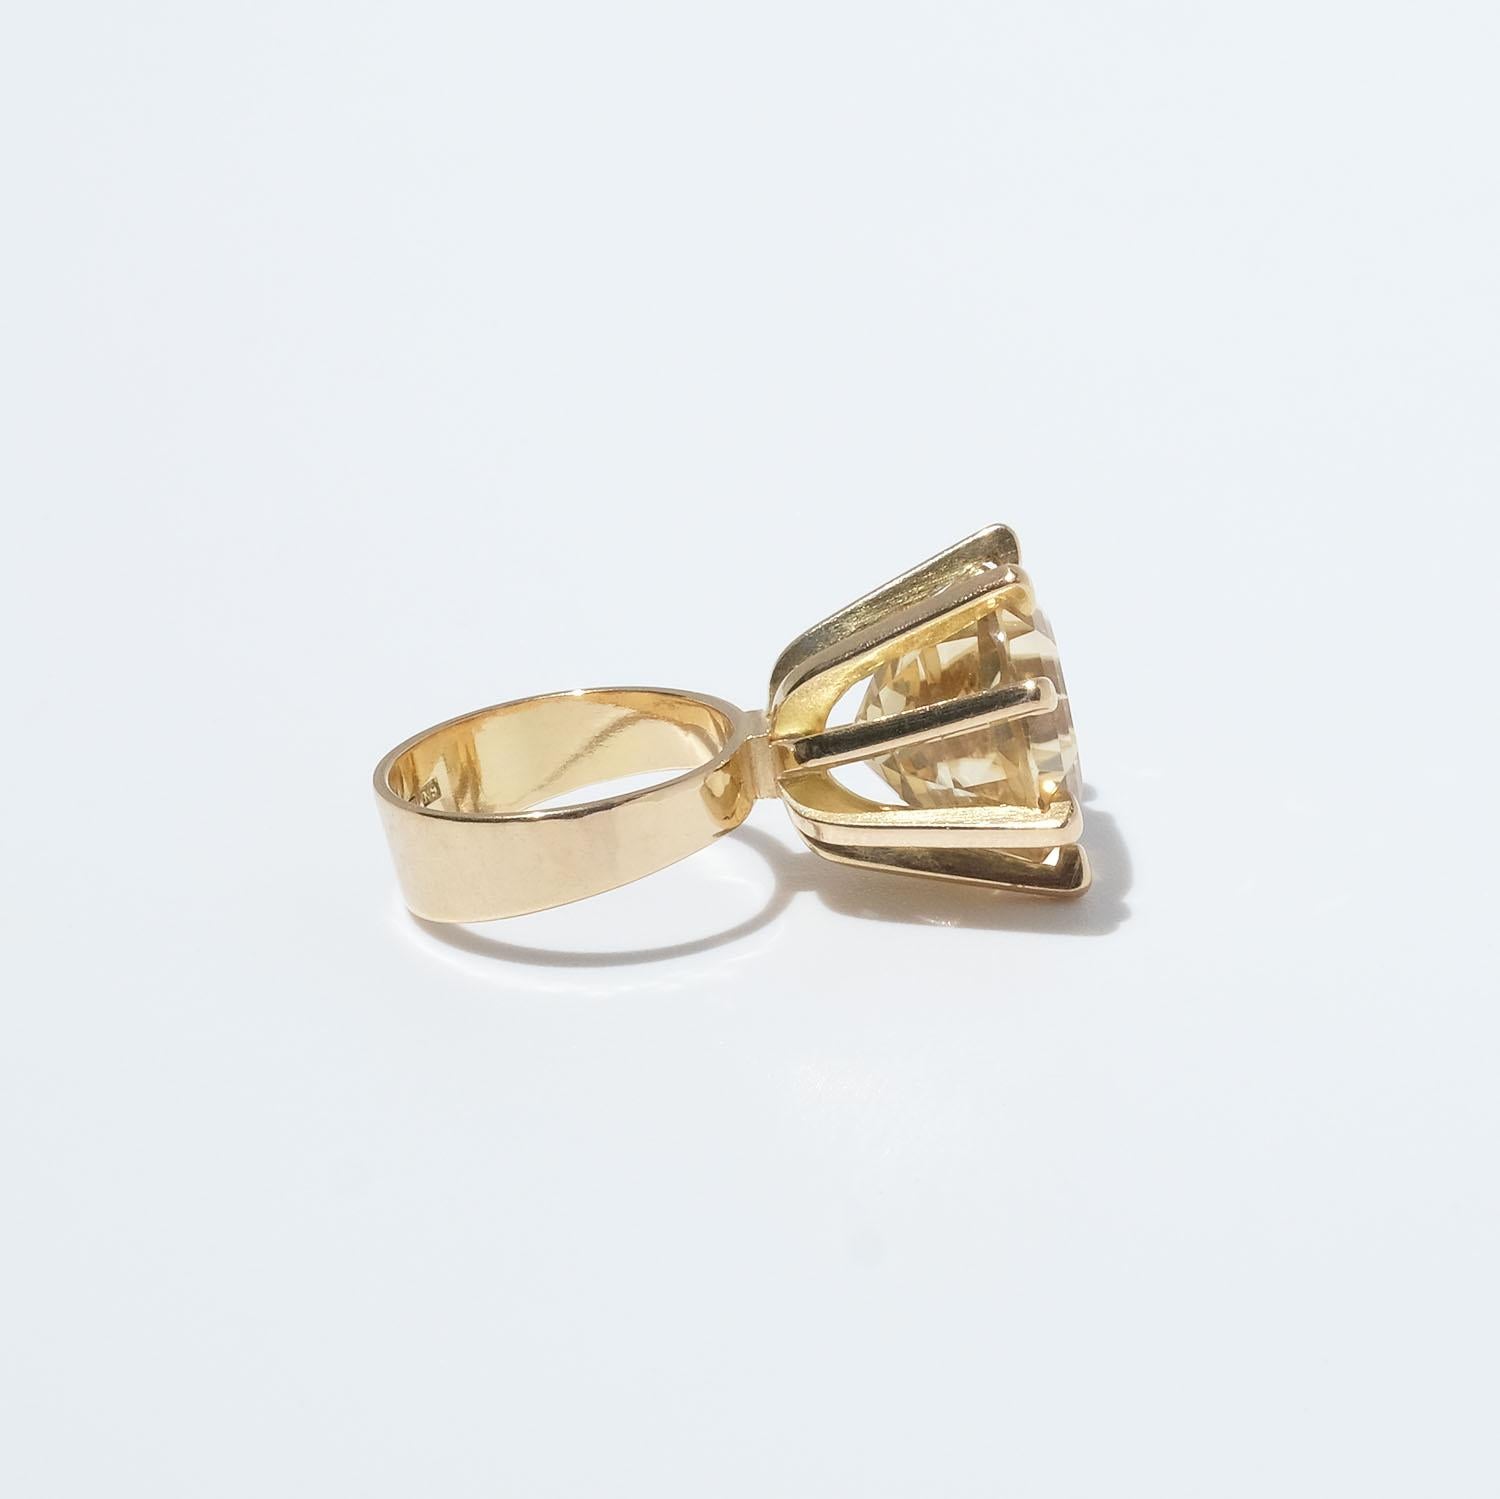 Women's 18k Gold and Citrine Ring by Swedish Masters Ge-kå Smycken. Made Year, 1963